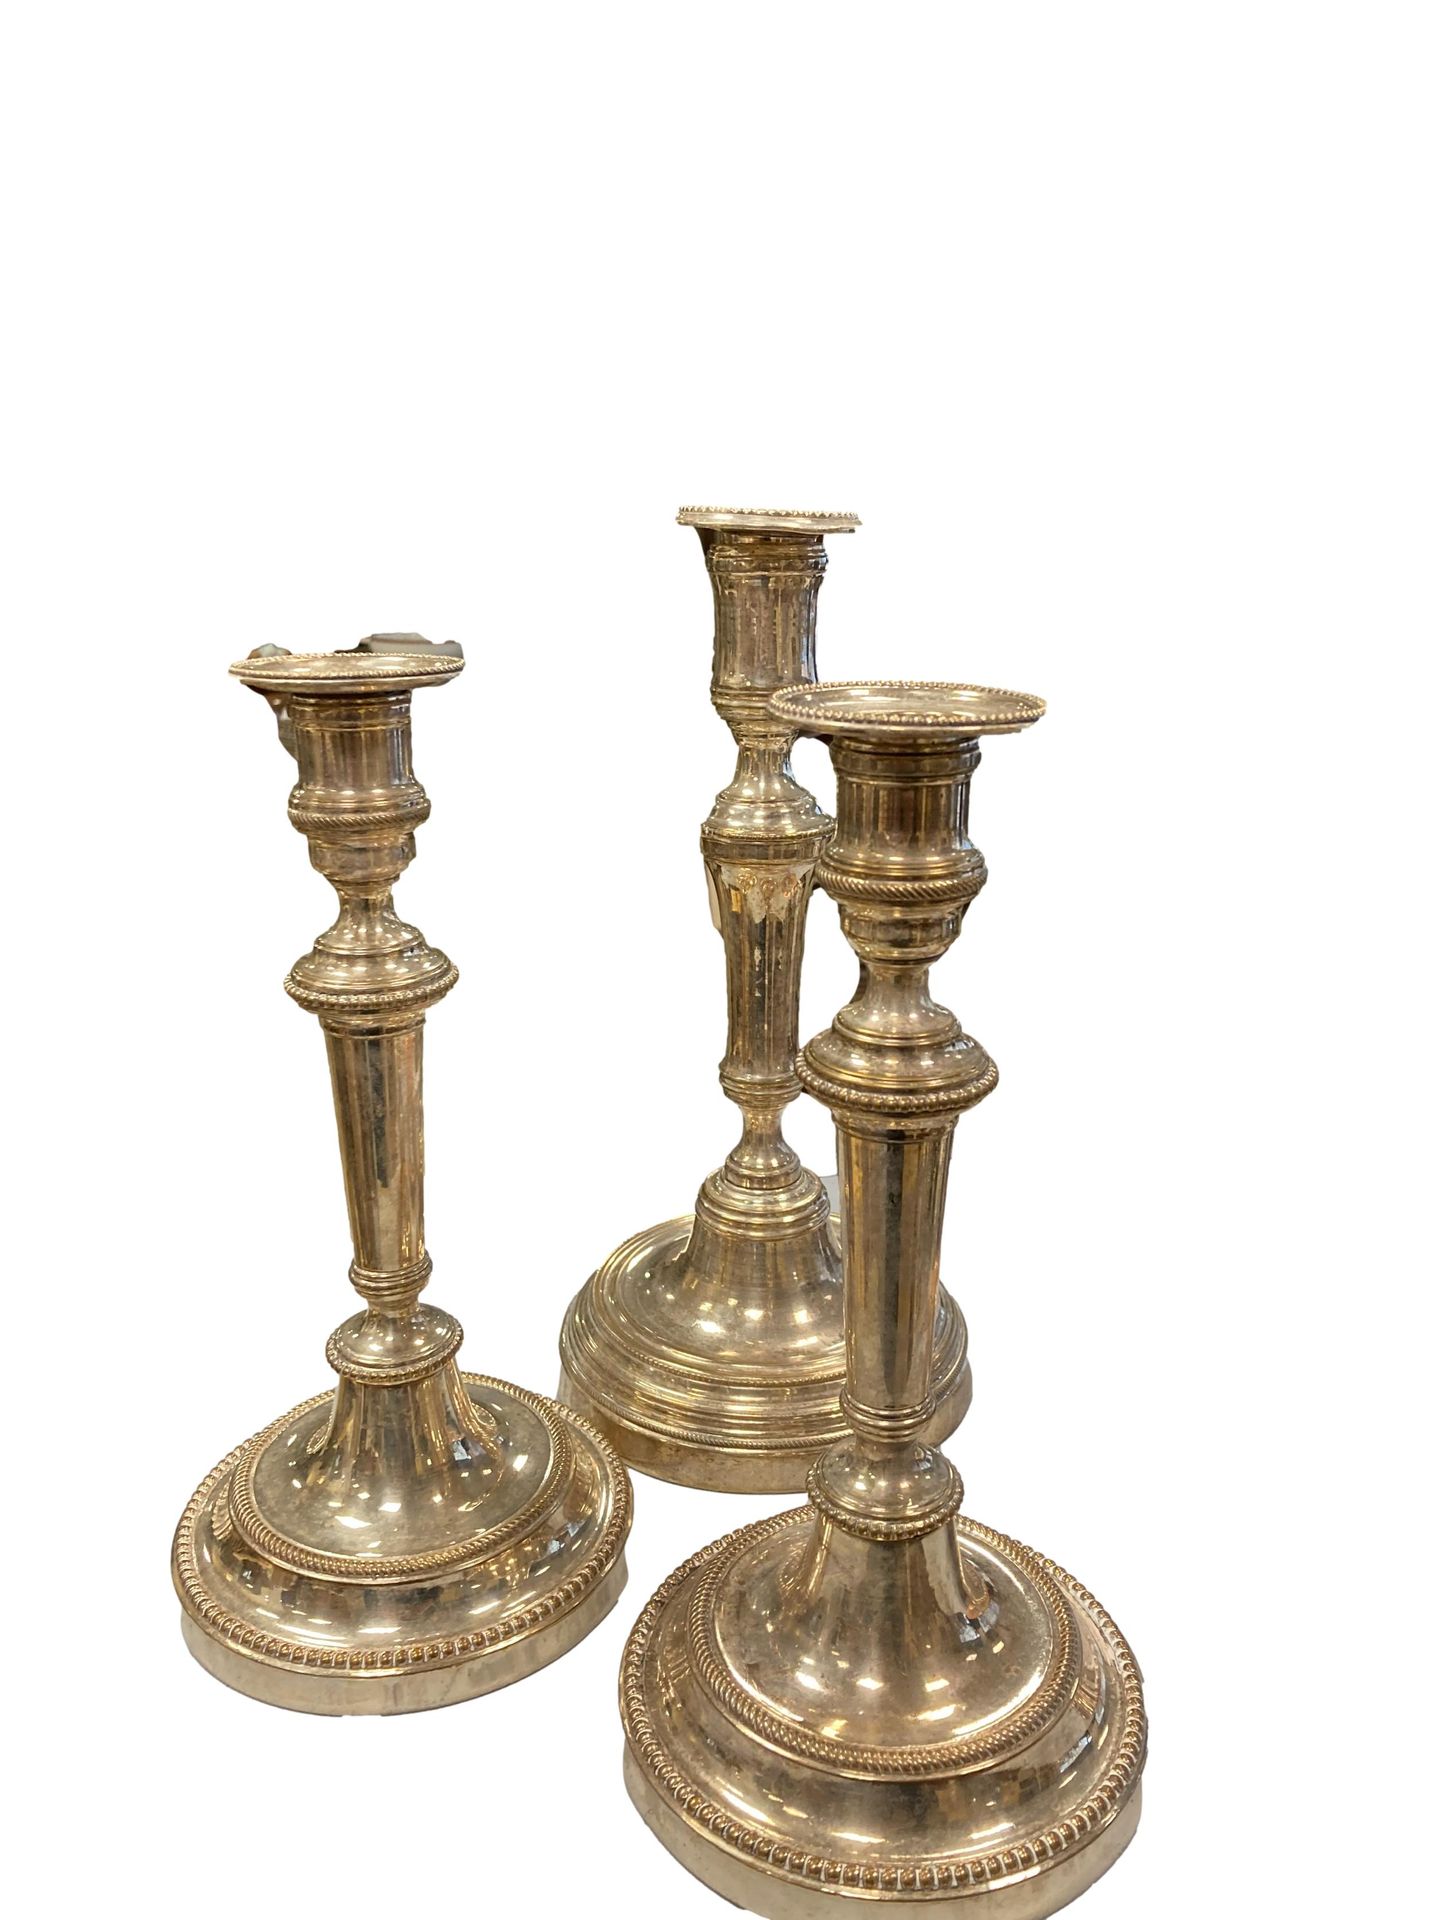 Null Set of three silver plated candlesticks decorated with pearl friezes

H. 25&hellip;